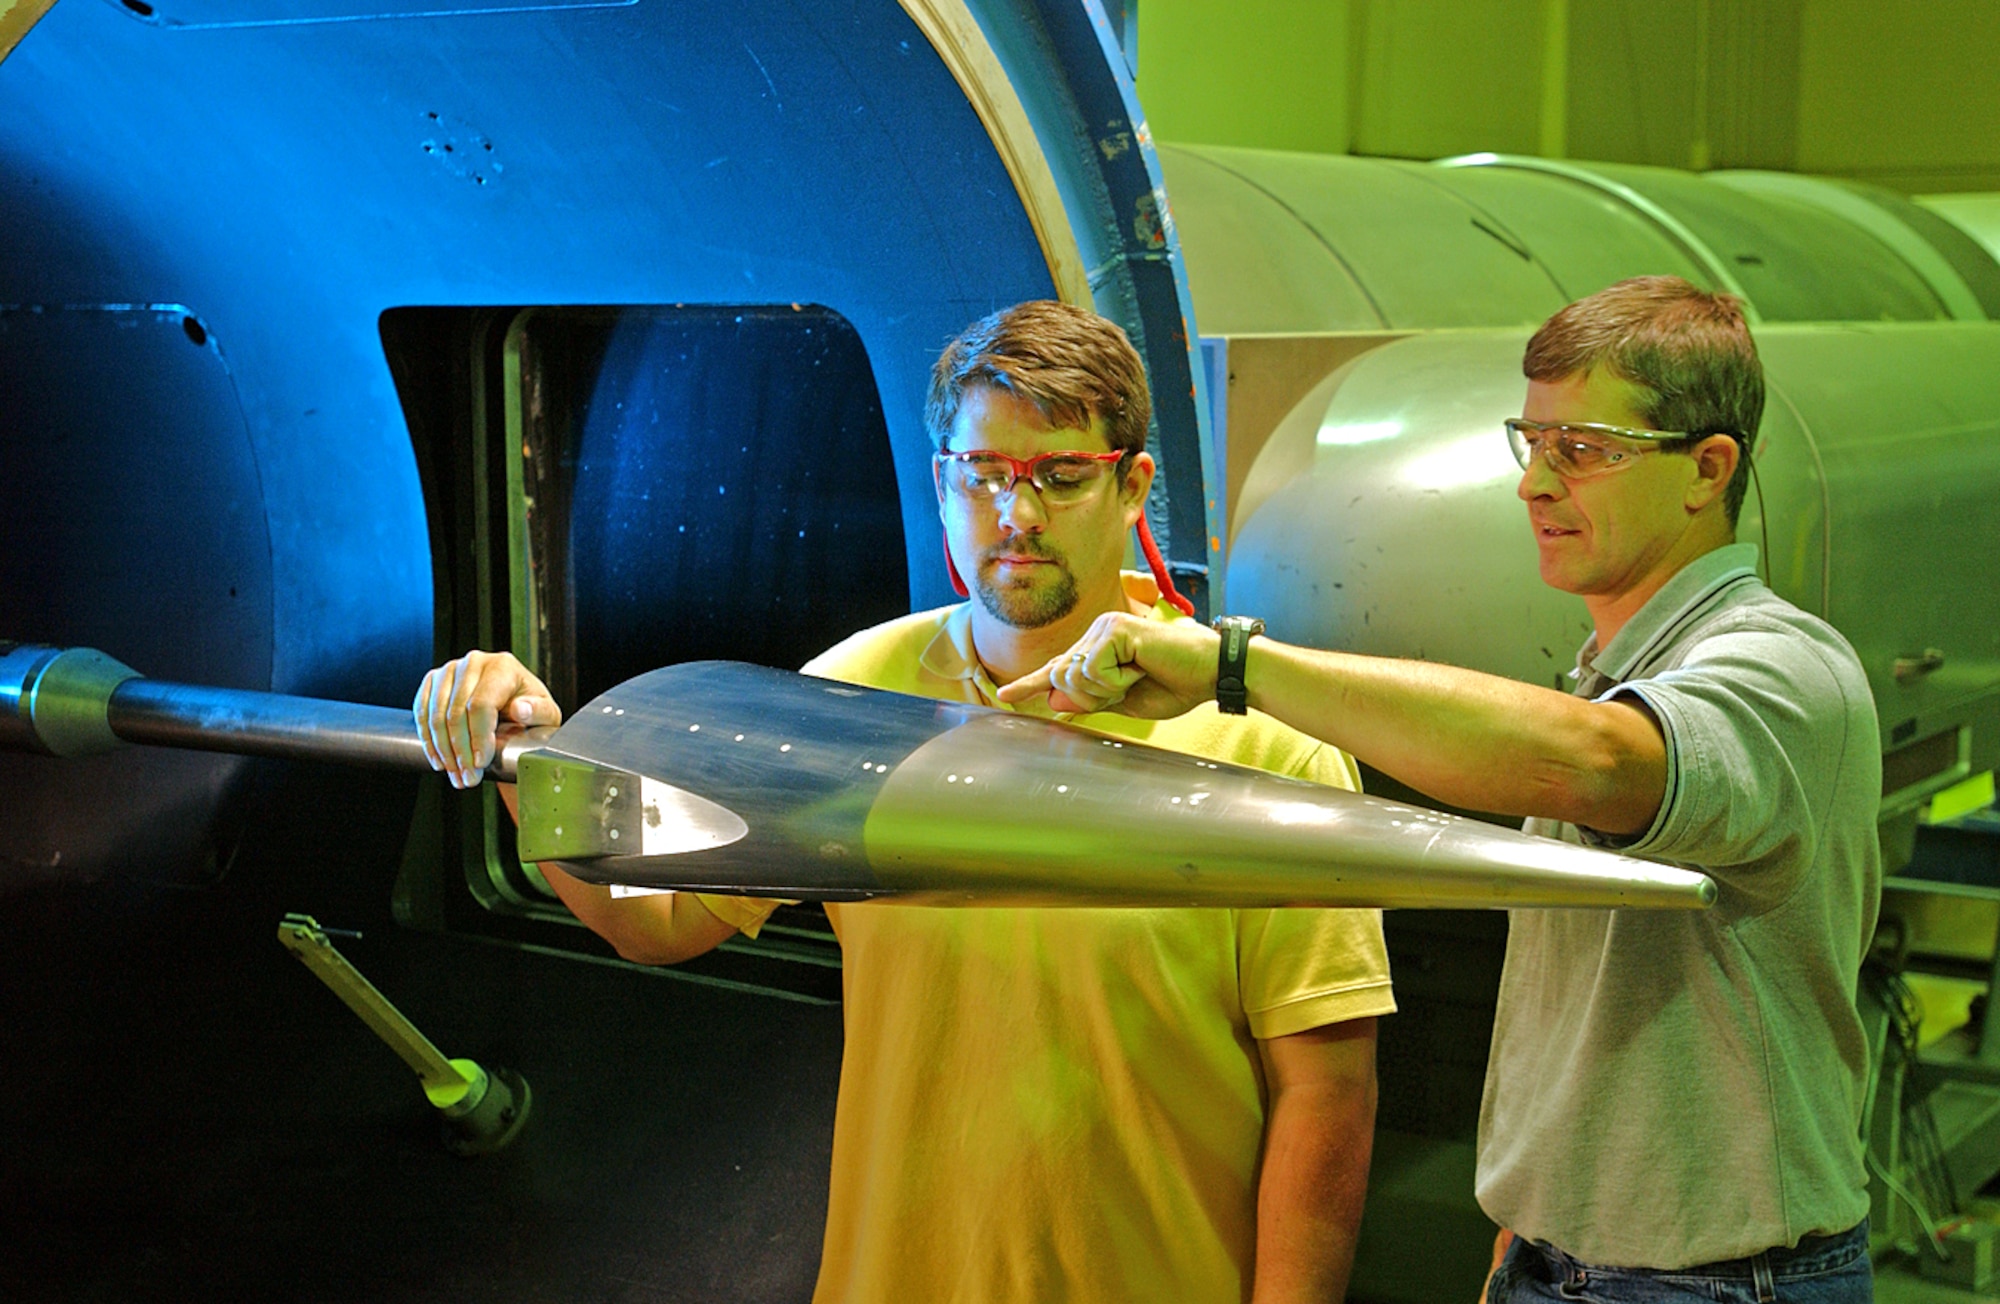 ARNOLD AIR FORCE BASE, Tenn. (AFPN) -- Test engineers Joe Norris (left) and John Lafferty ready a Hypersonic Technology Vehicle-1 model prior to a Hypervelocity Wind Tunnel 9 operation. (U.S. Air Force photo)